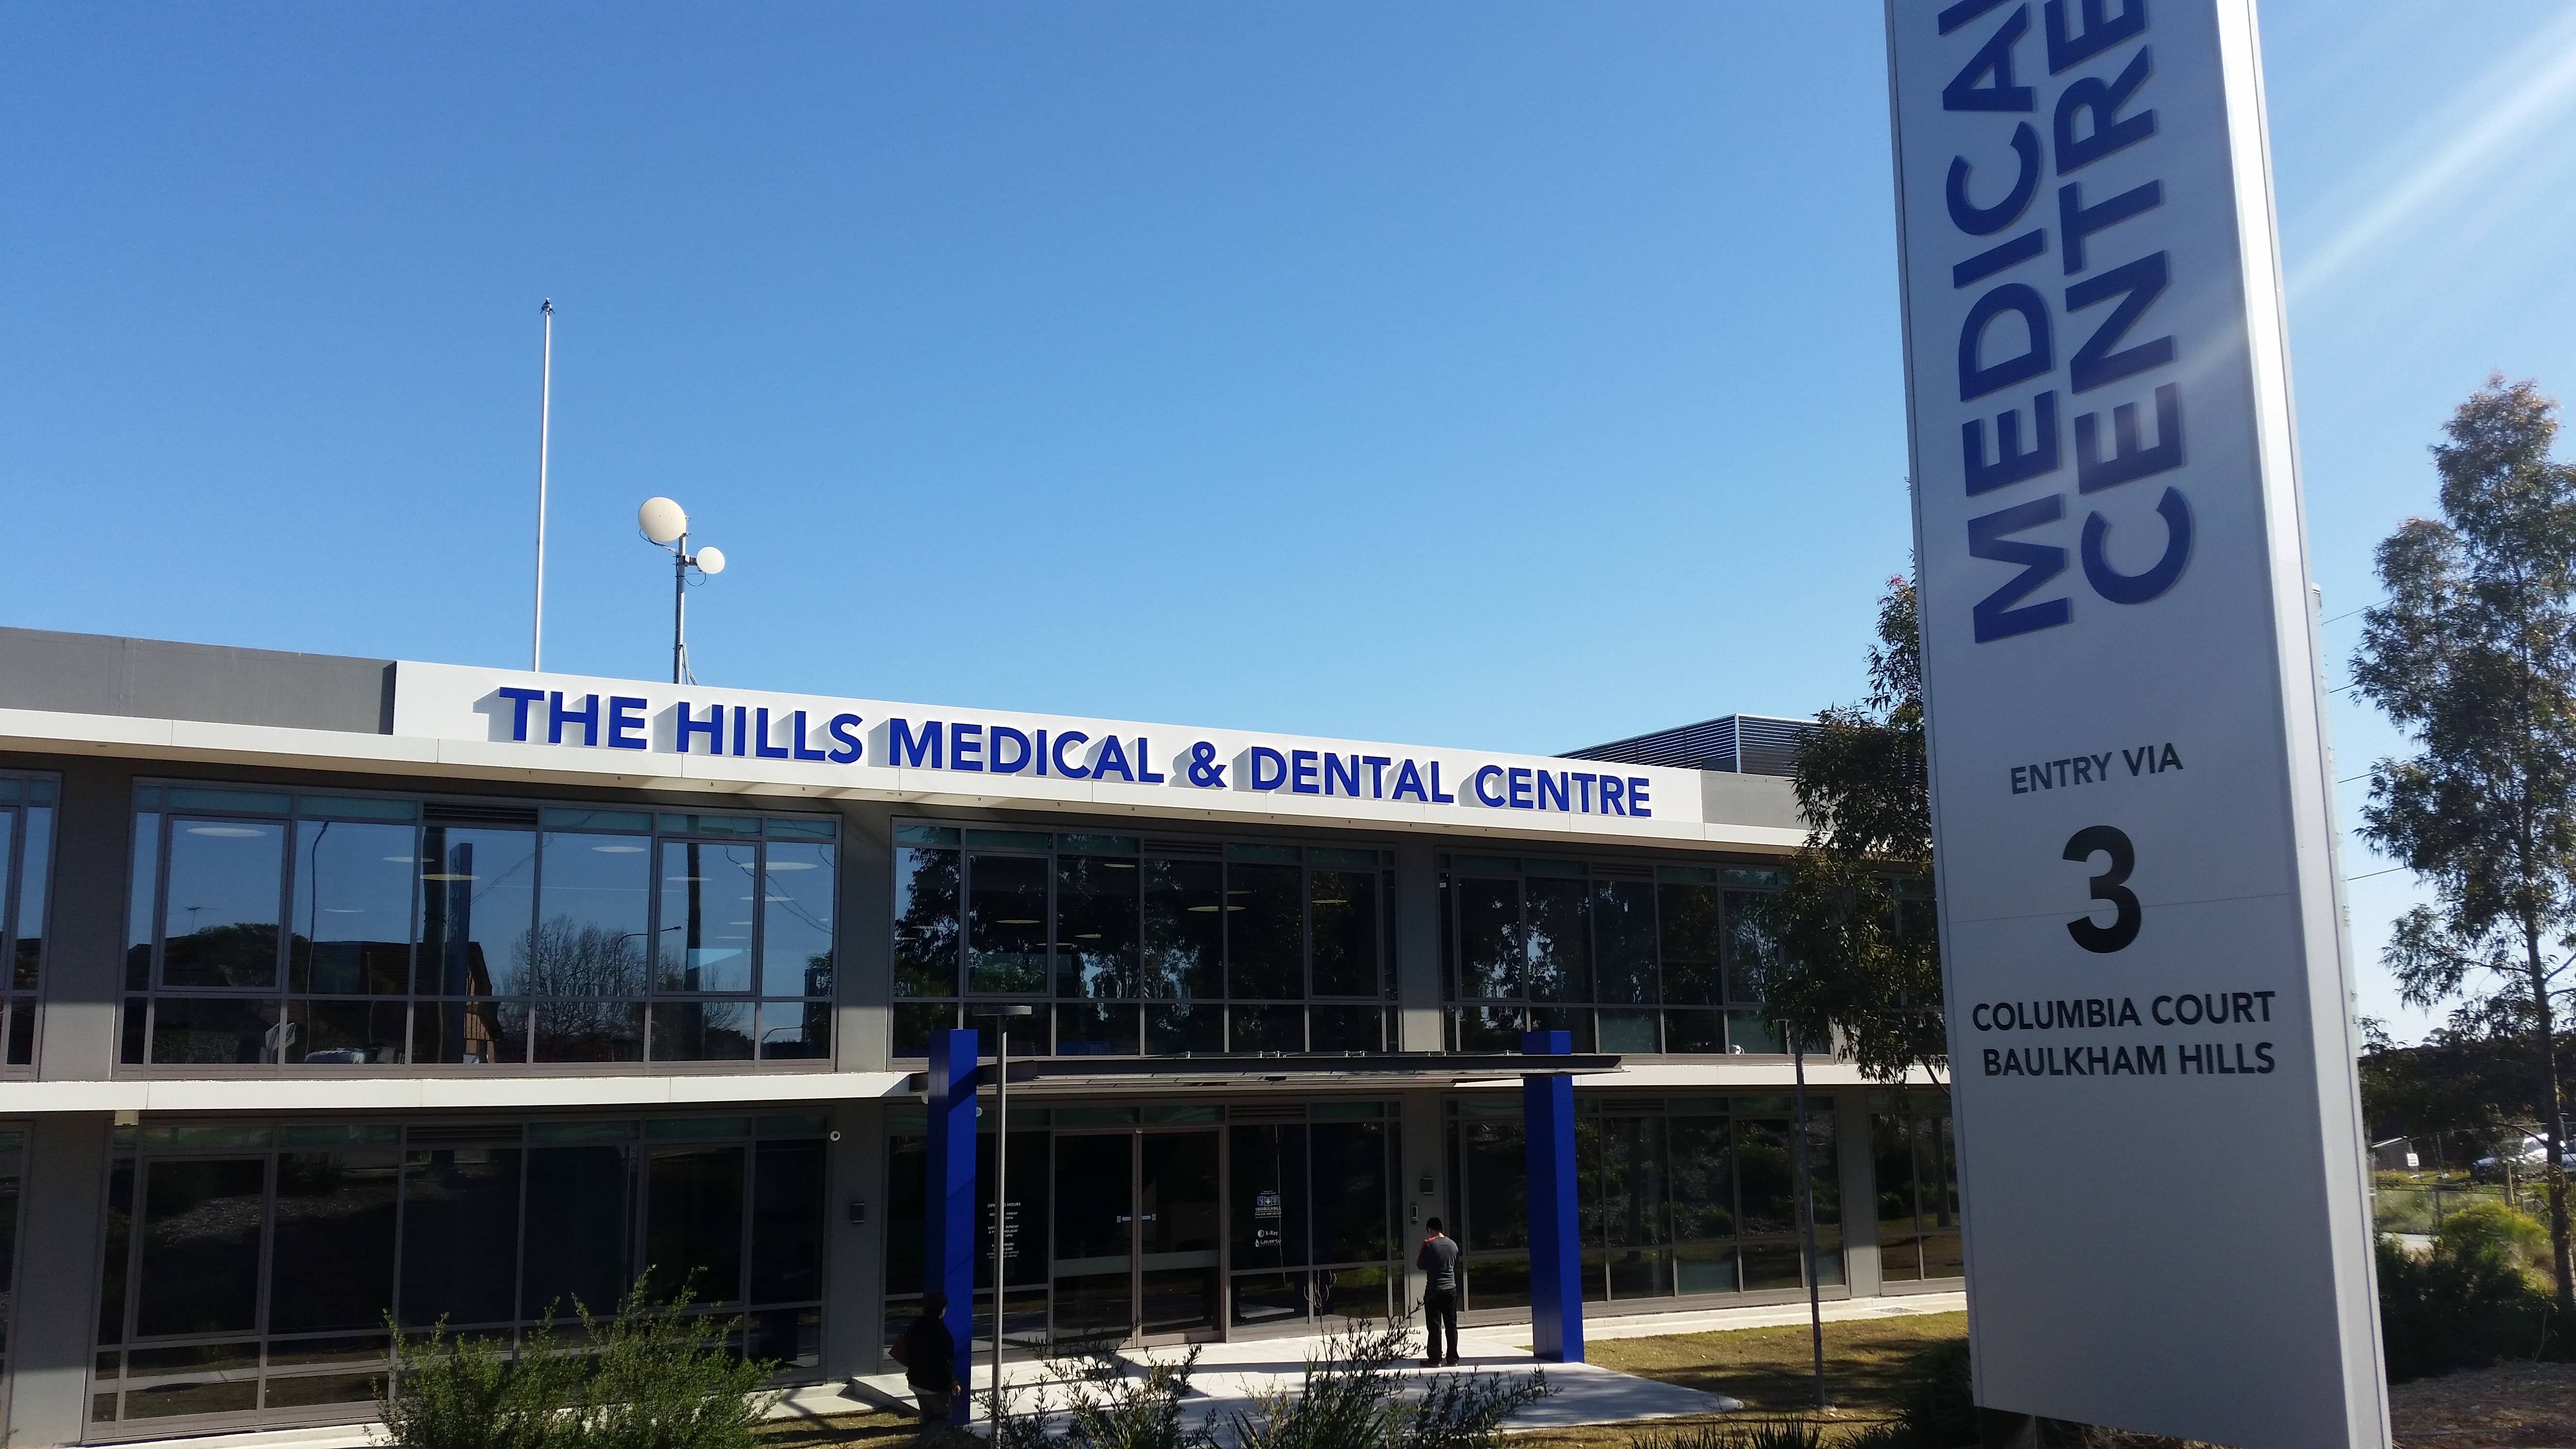 The Hills Medical & Dental Pylon & Fabricated Letters